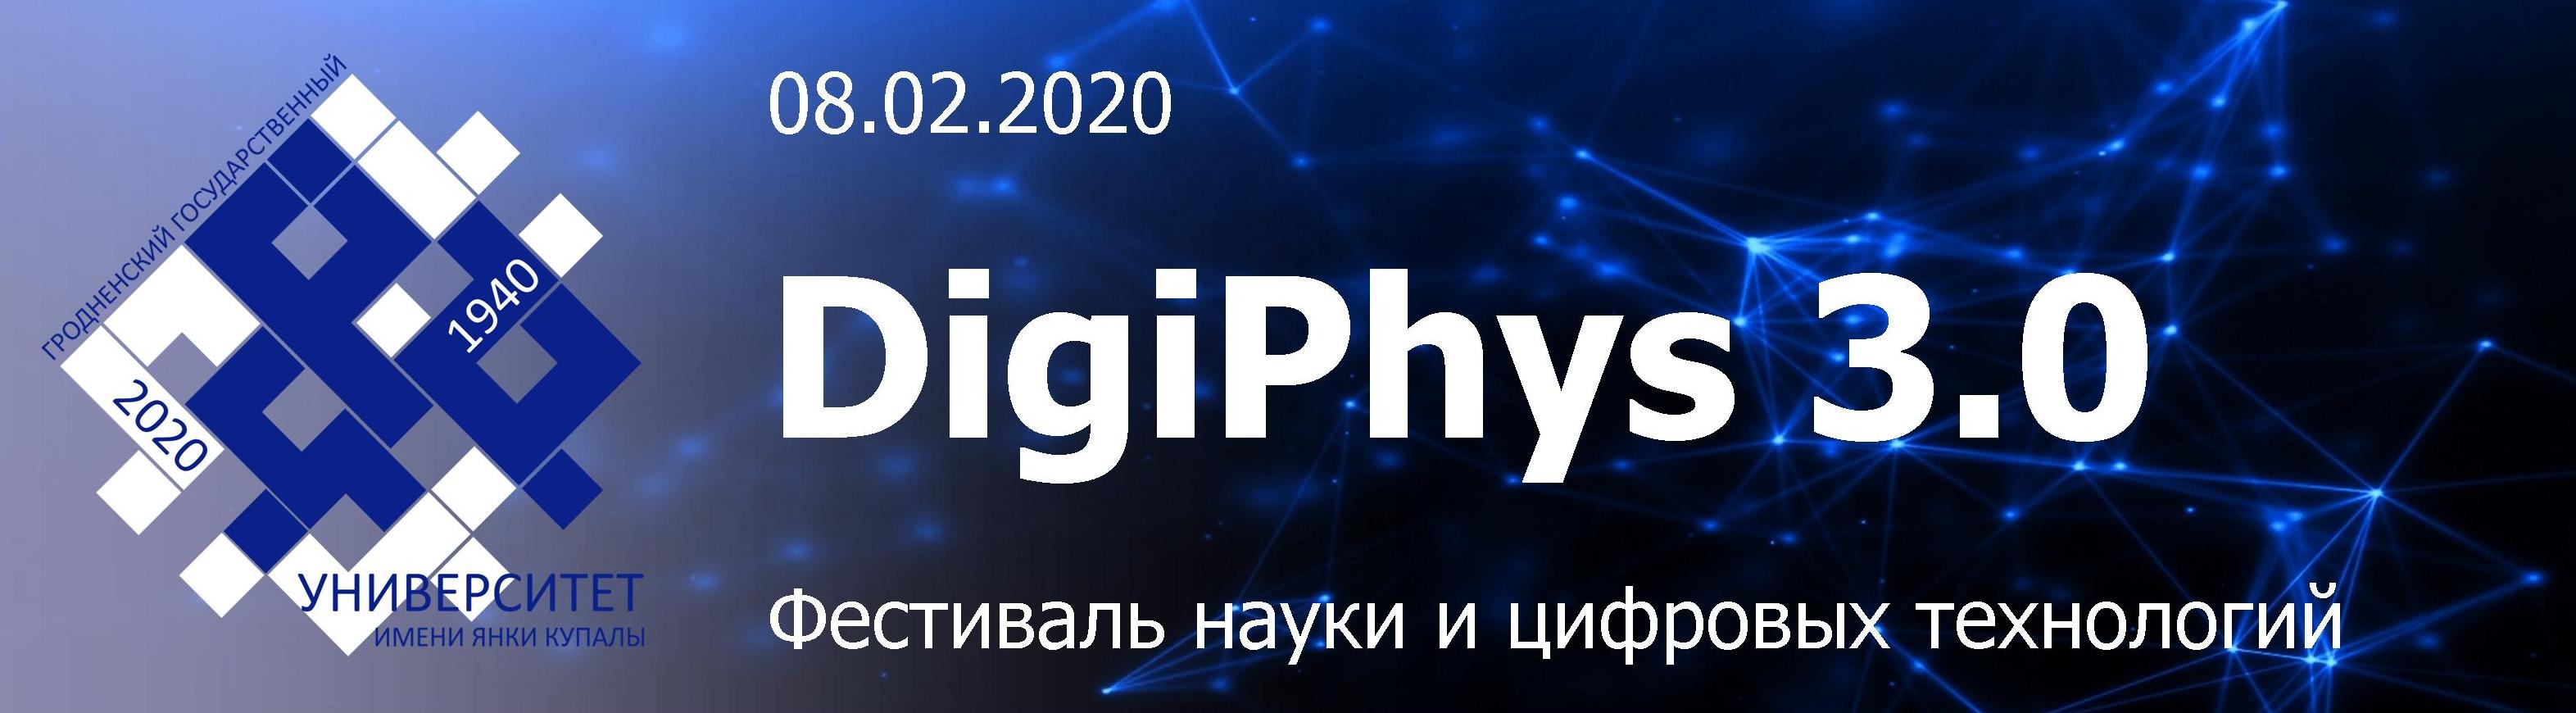 DigiPhys 3.0